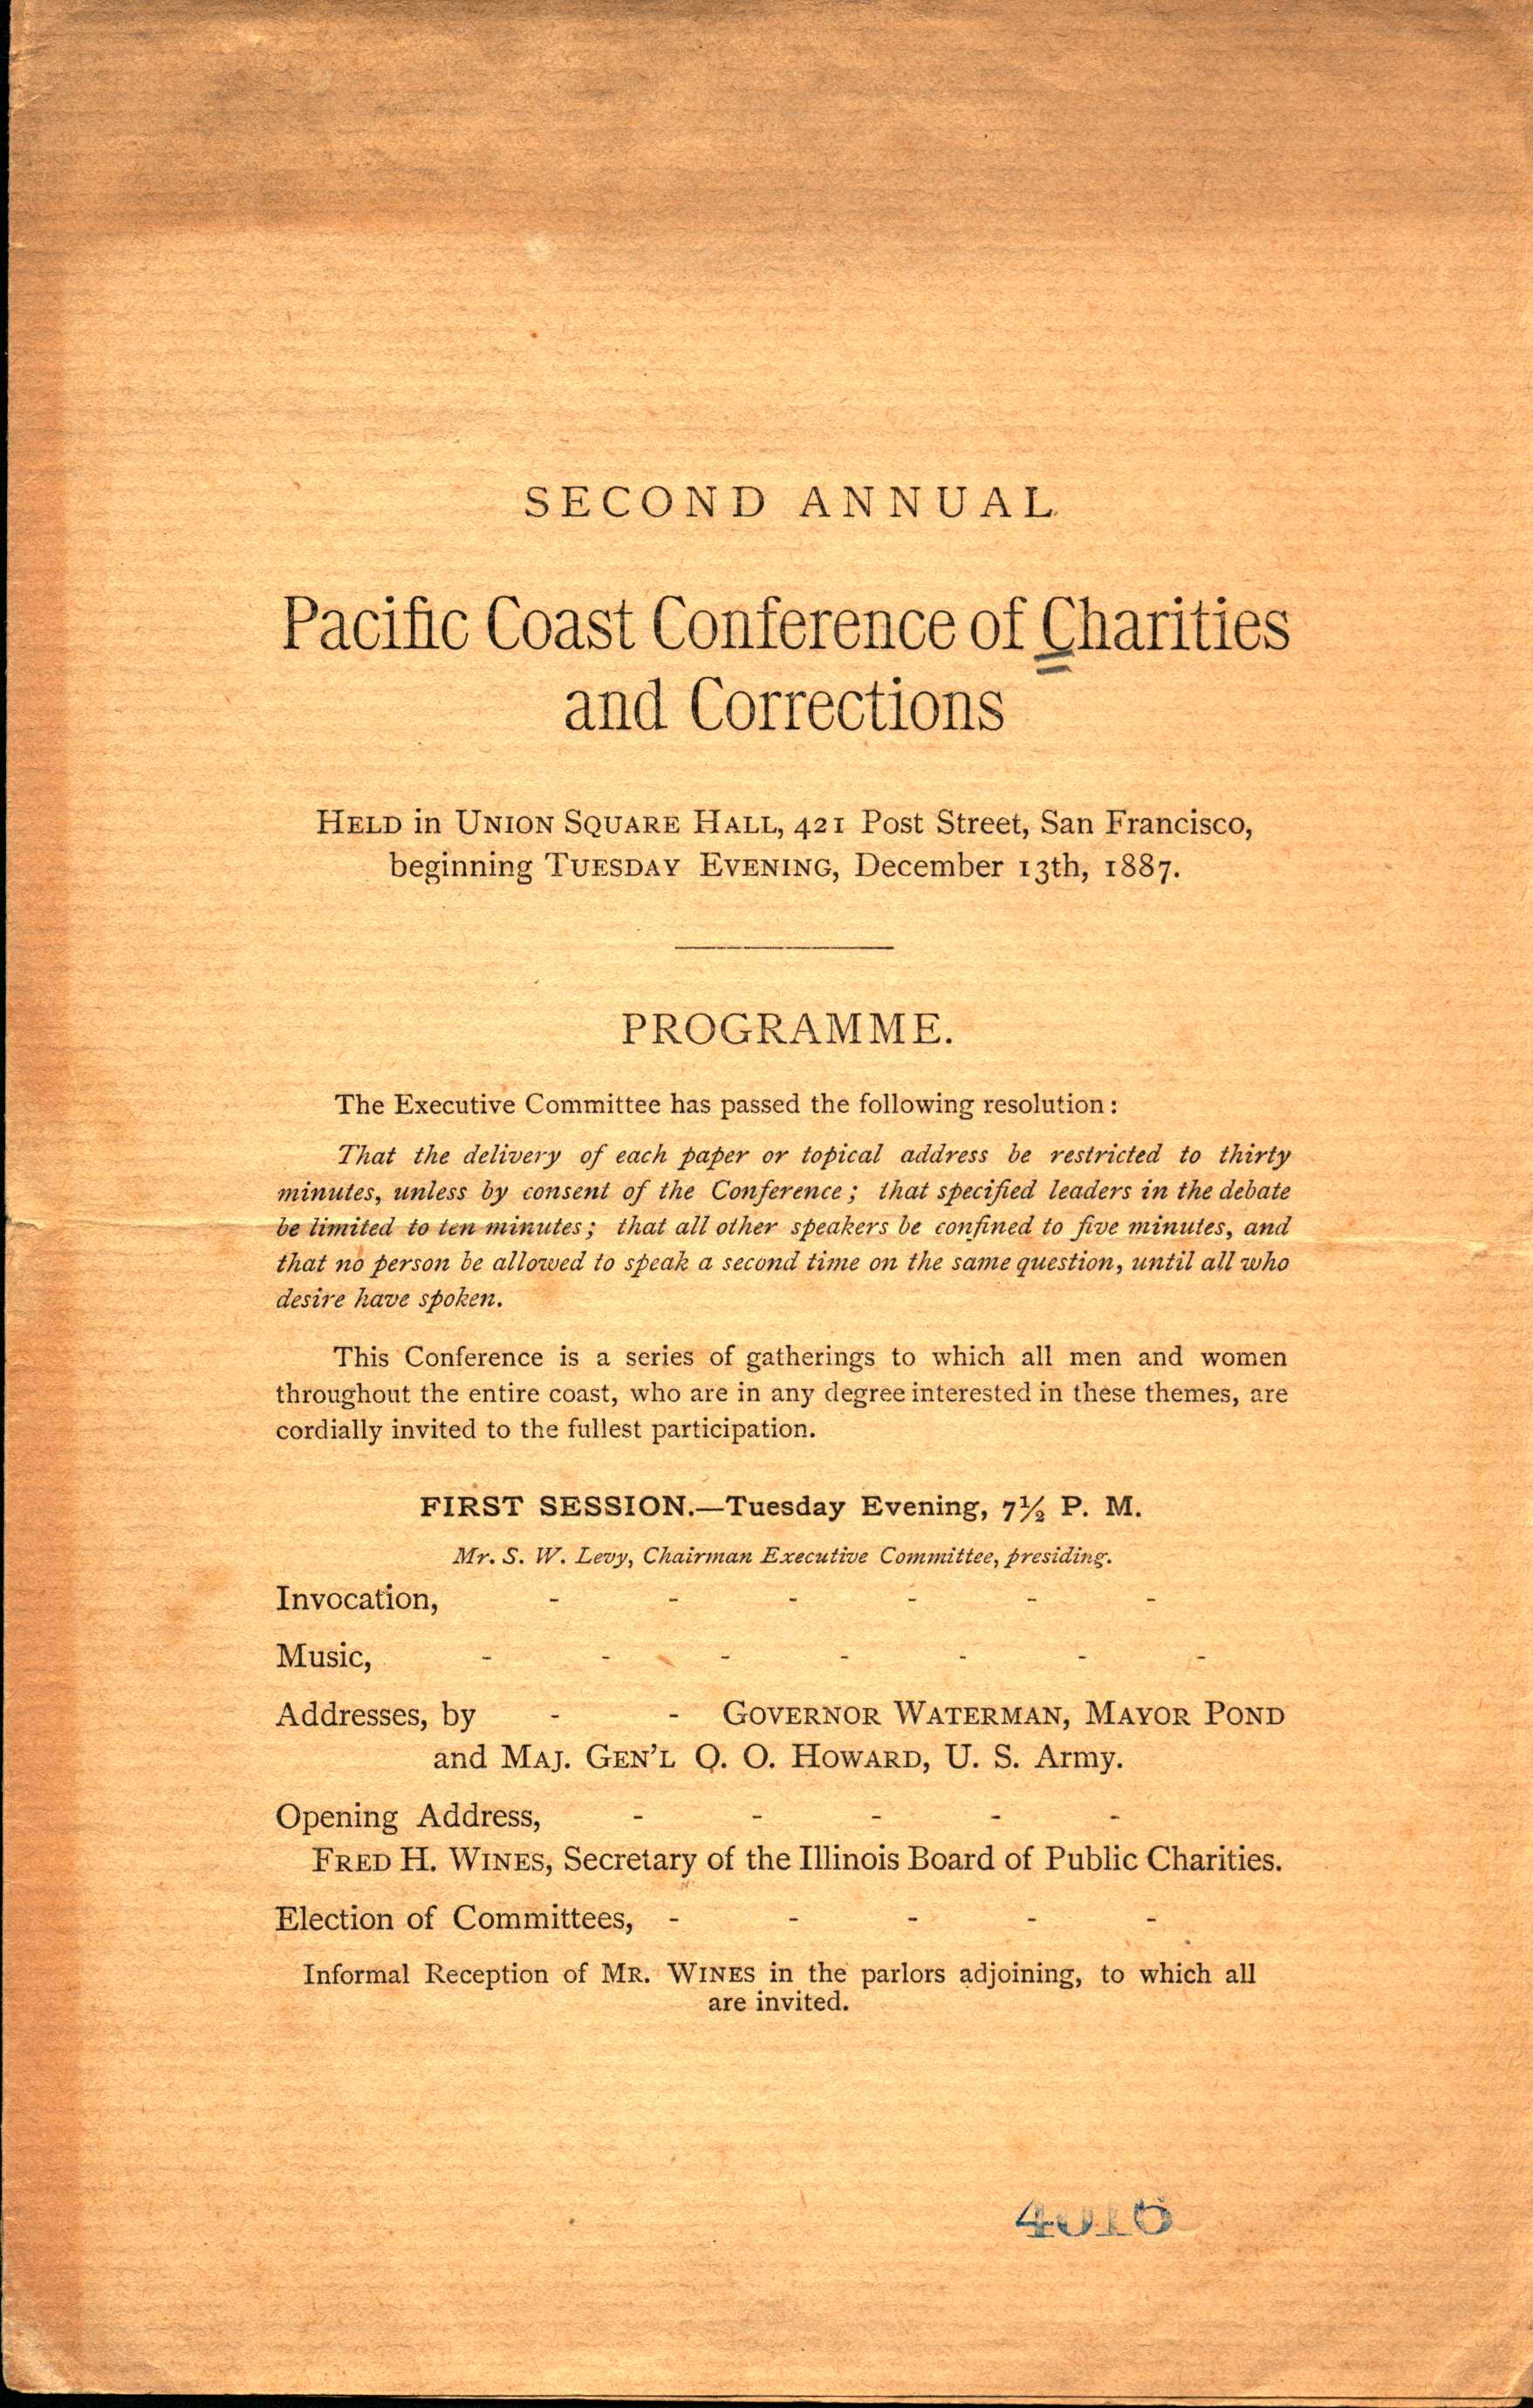 Front cover of program shows information about the first conference session